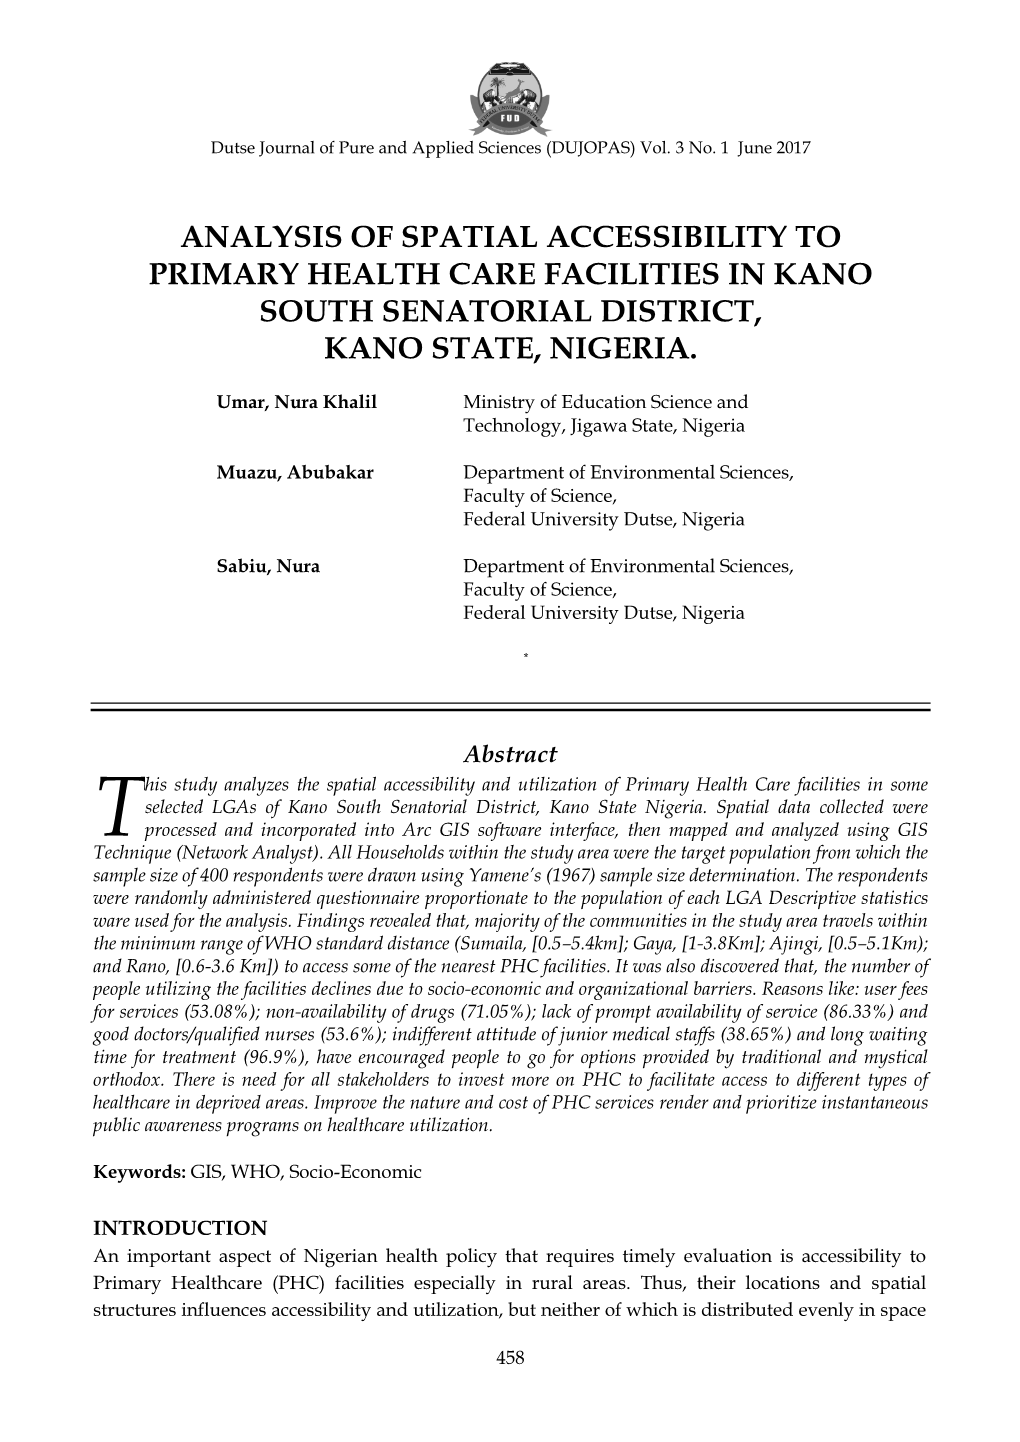 Analysis of Spatial Accessibility to Primary Health Care Facilities in Kano South Senatorial District, Kano State, Nigeria